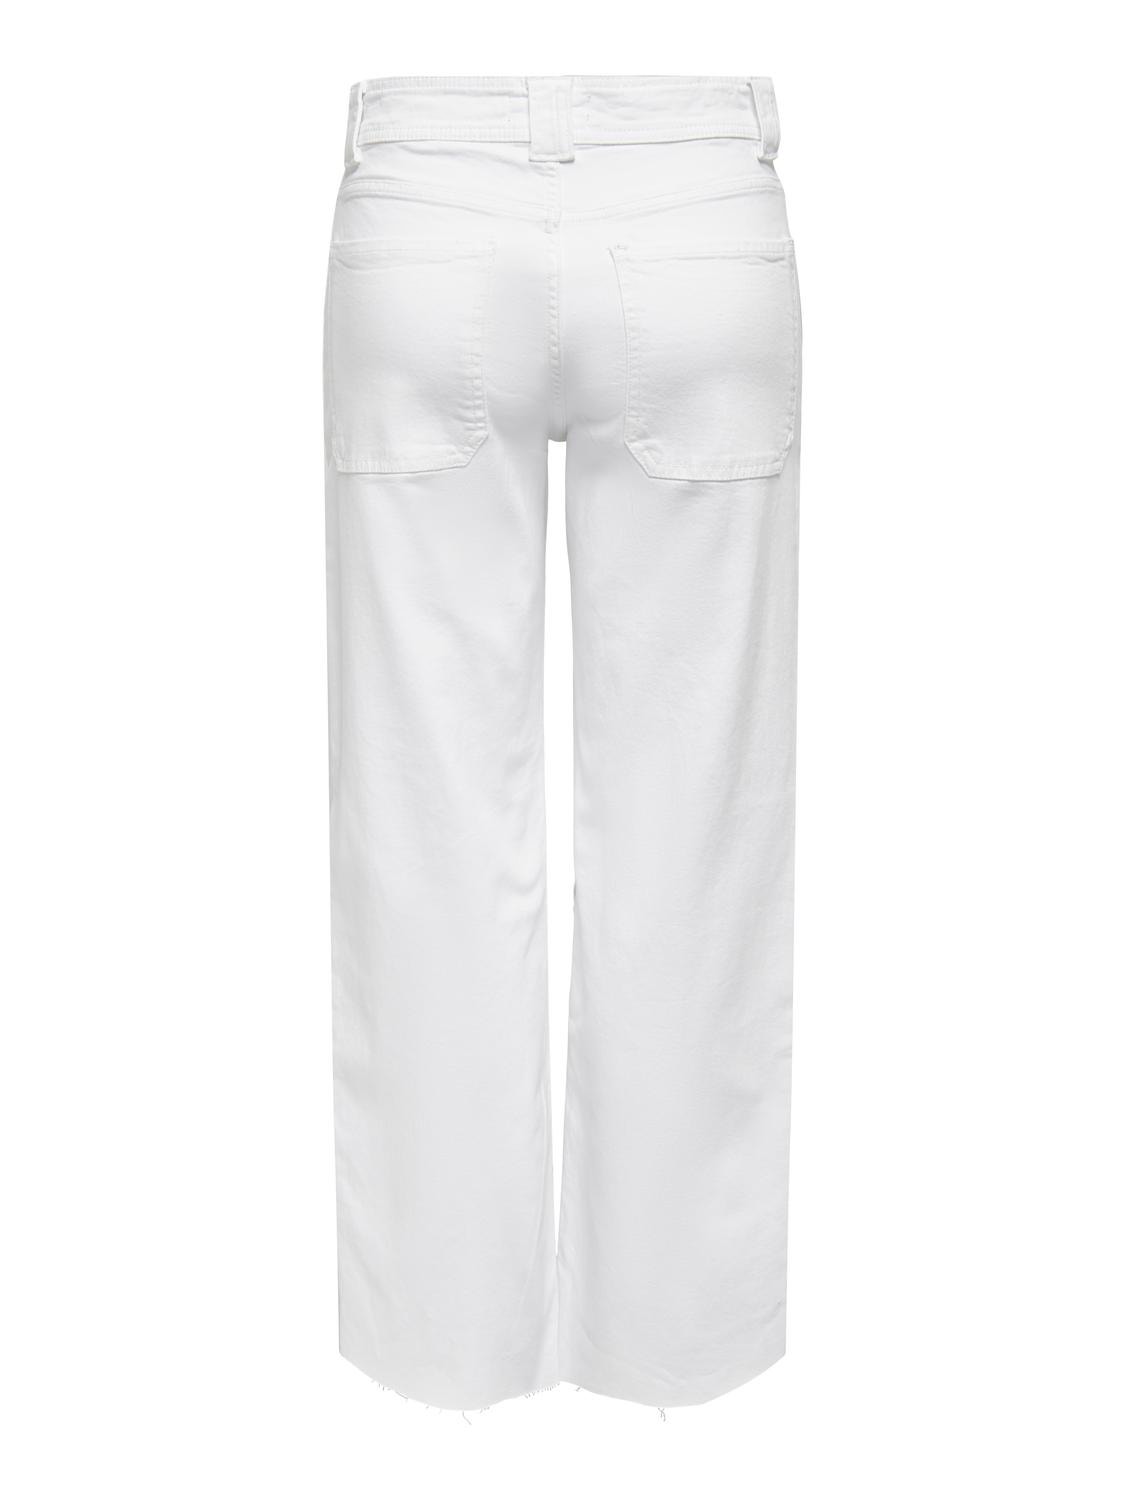 ONLY onlalara hw wide pant cc pnt -Bright White - 15311283